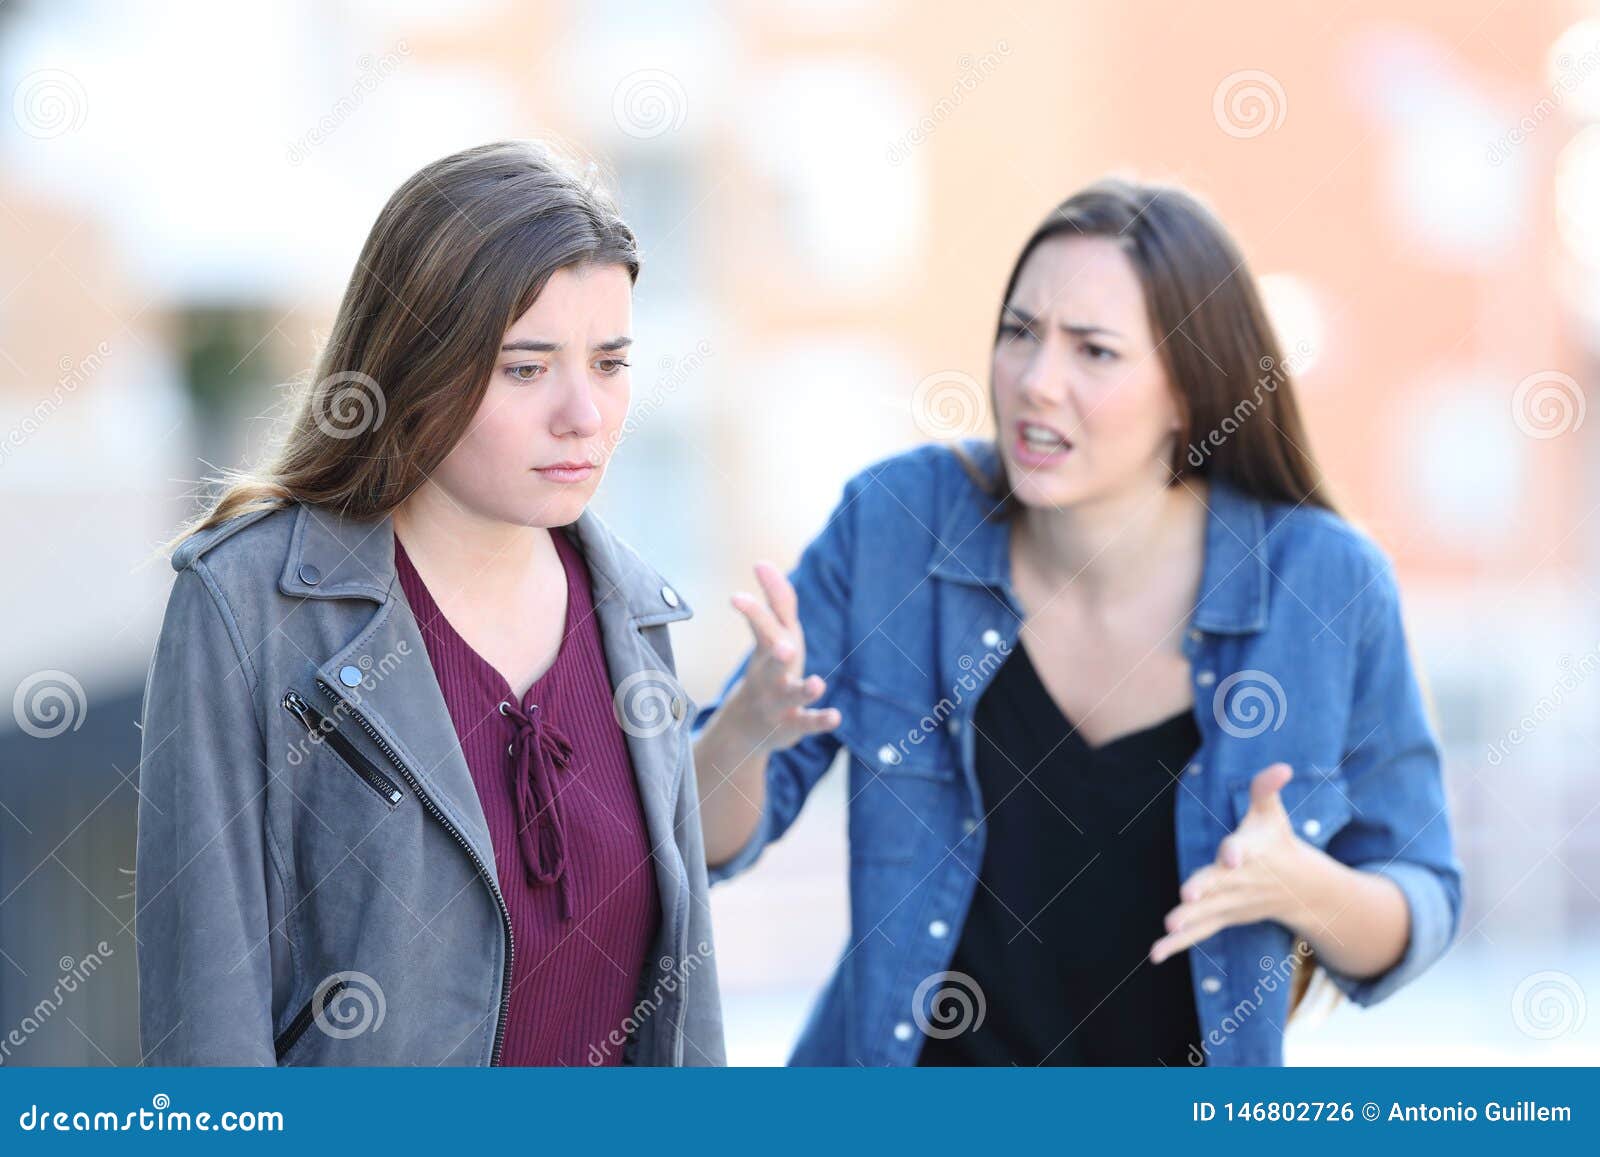 angry woman scolding her guilty friend